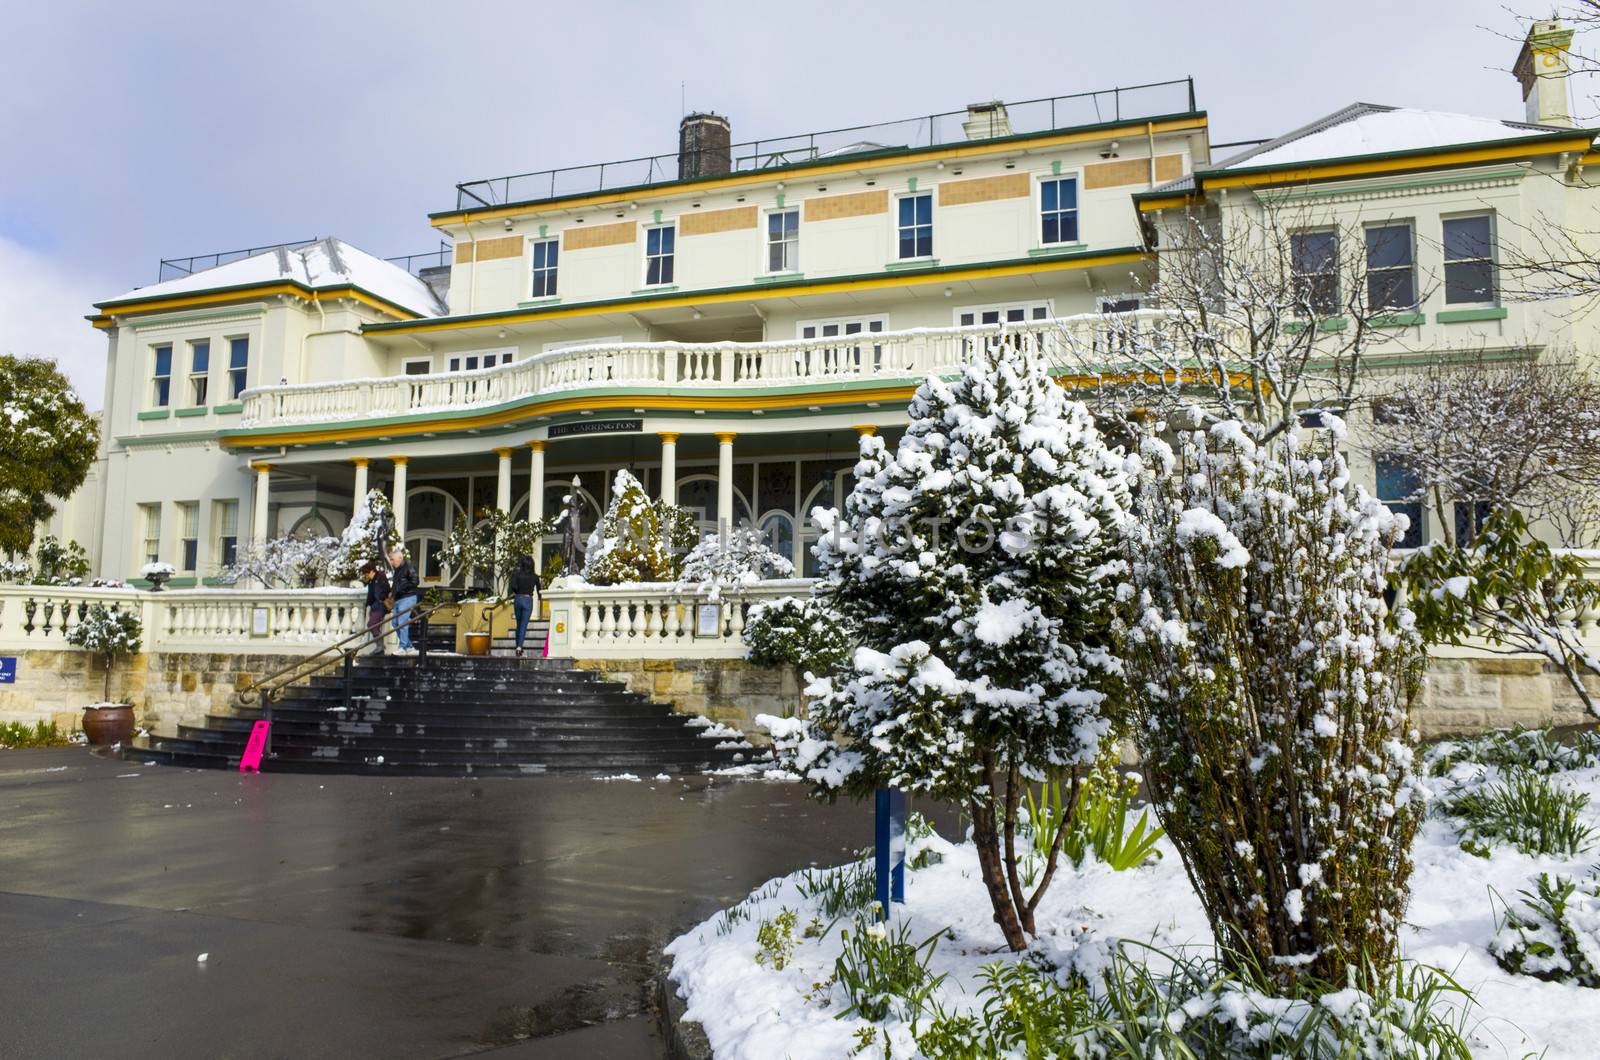 The historic Carrington Hotel in Katoomba after a winter snowfal by jaaske